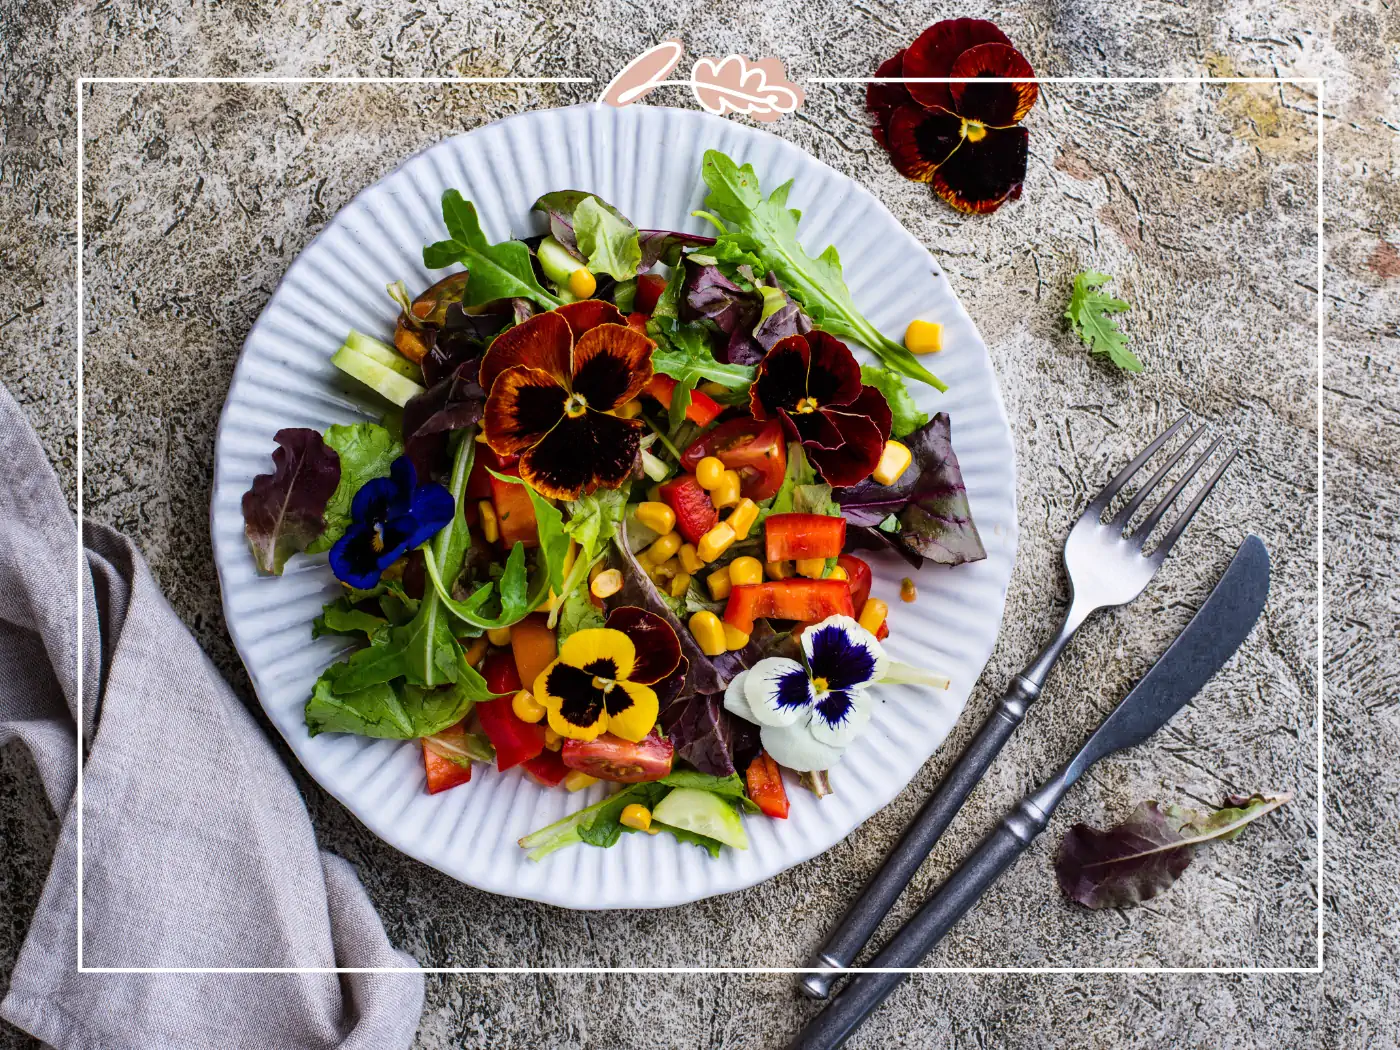 Fresh salad with a variety of edible flowers on a plate. Fabulous Flowers and Gifts.